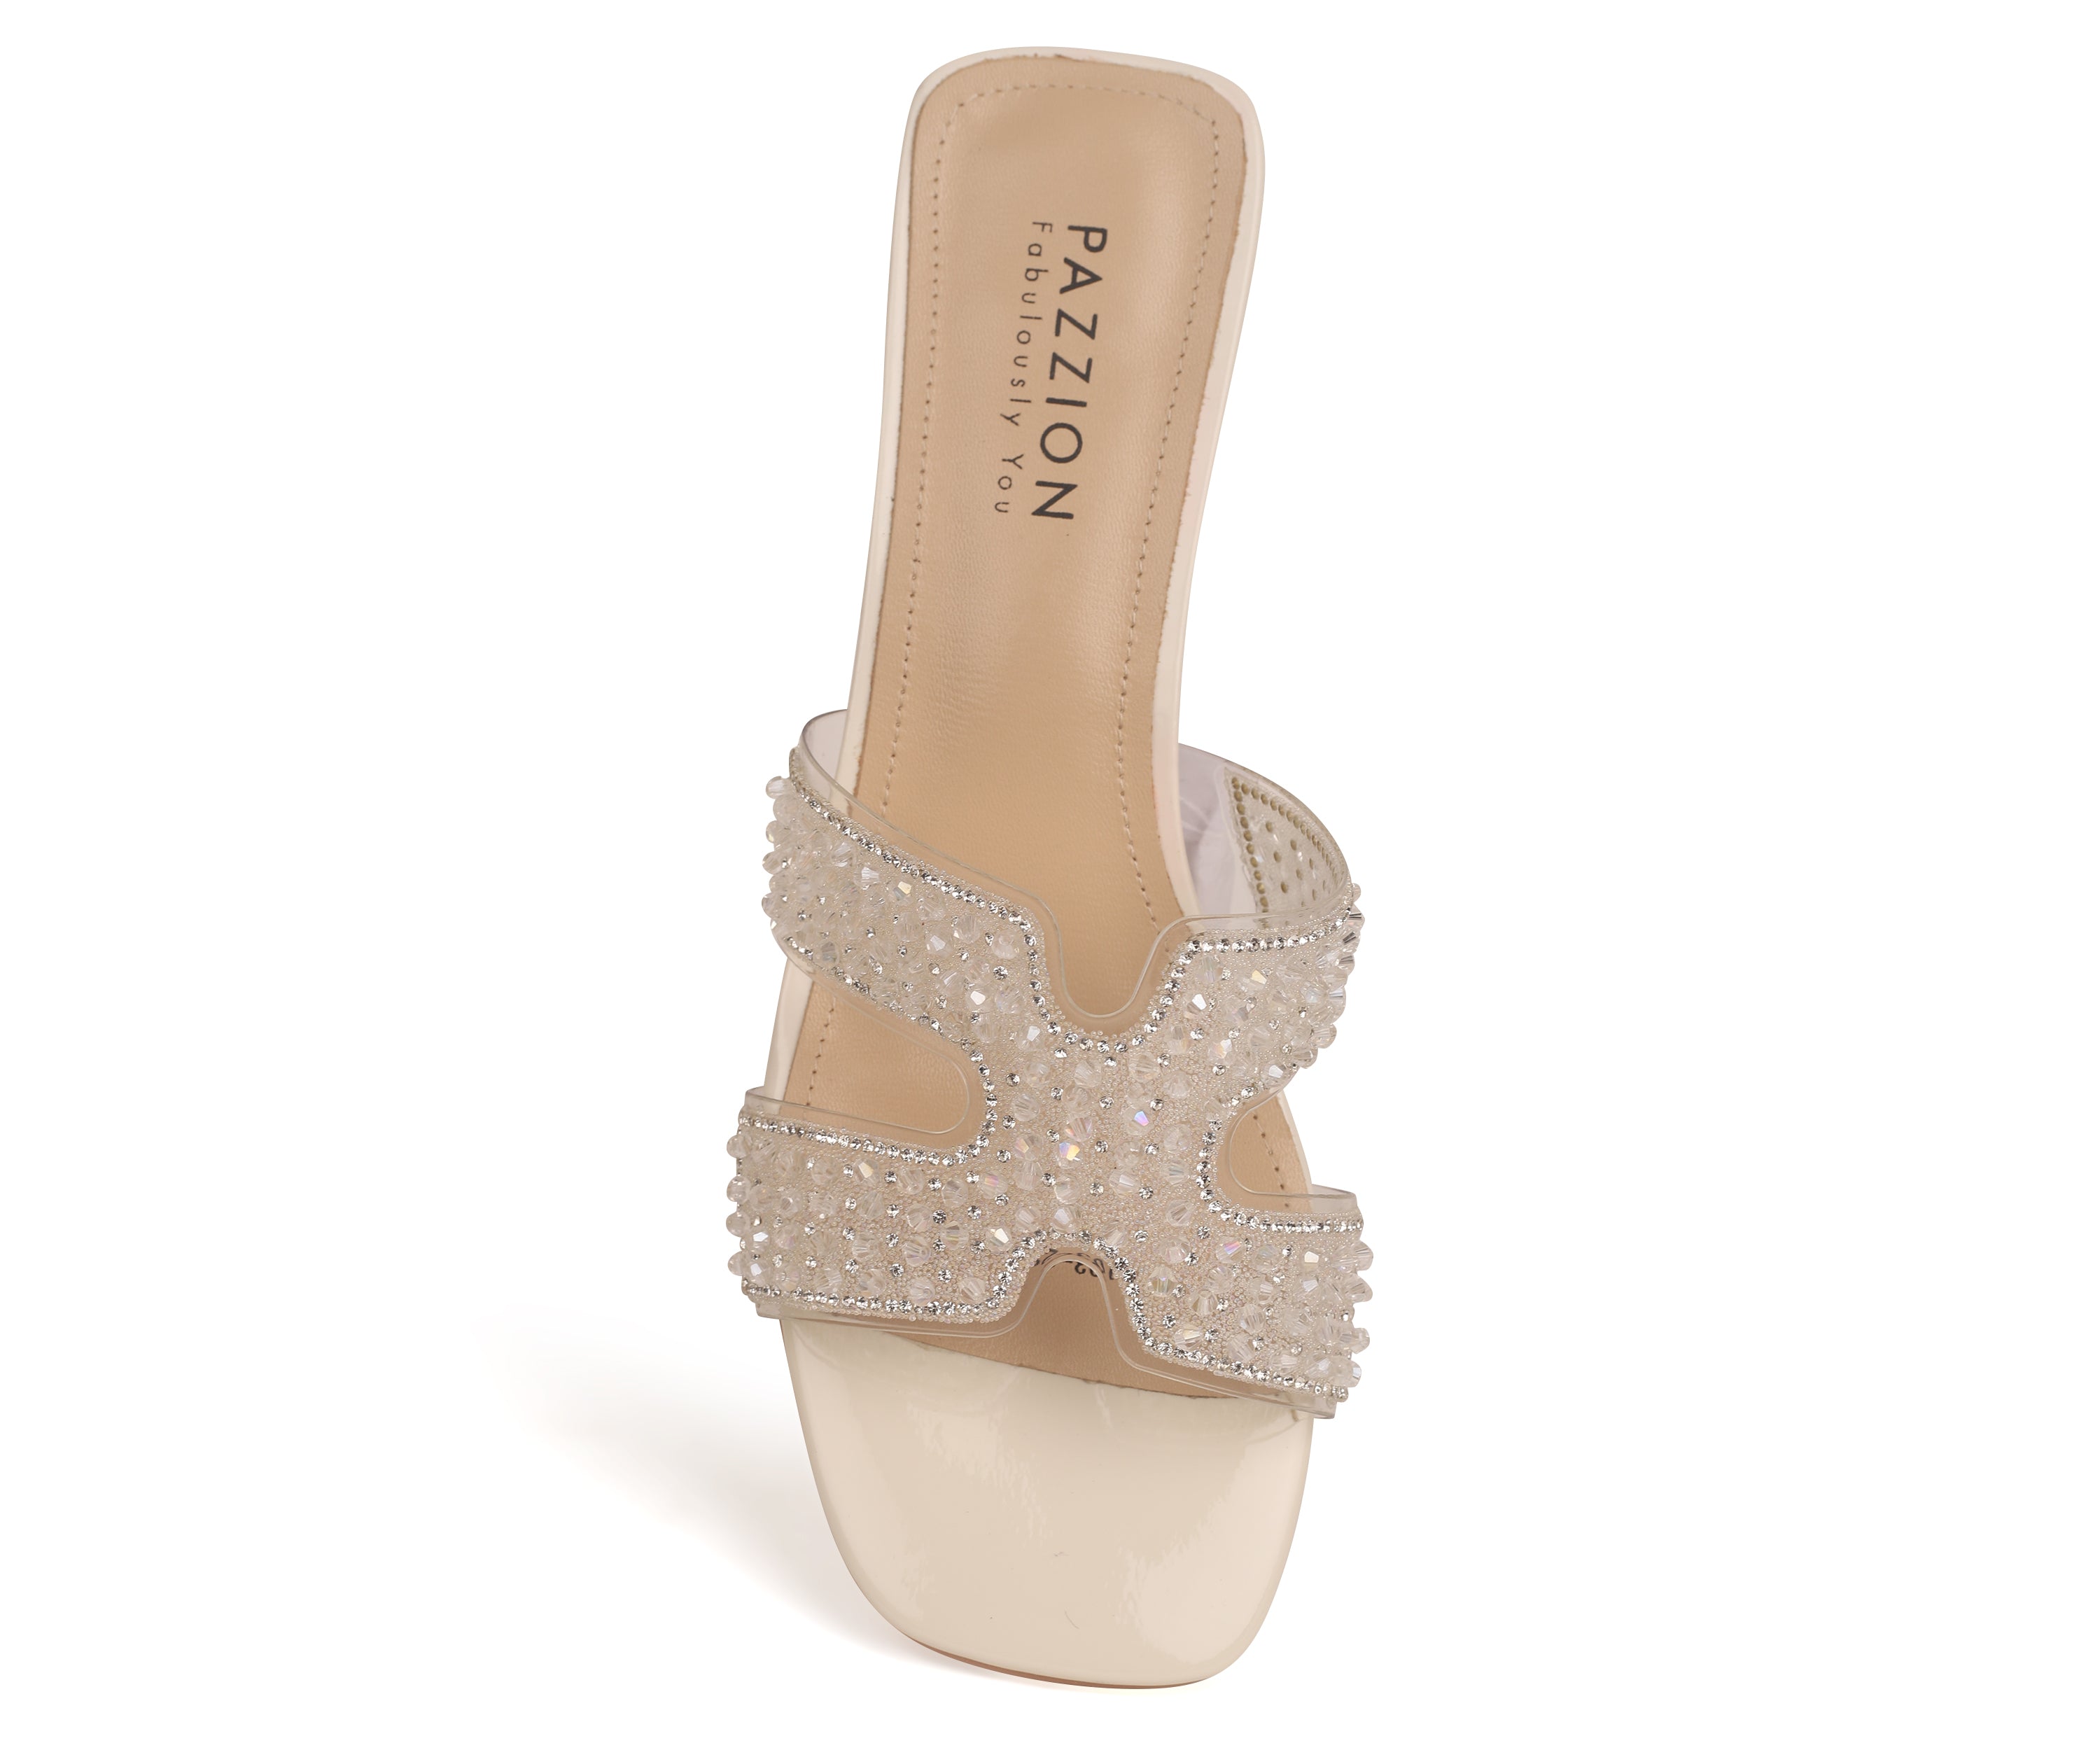 3103-22 Maeve Crystal Strapped Sandals- Apricot